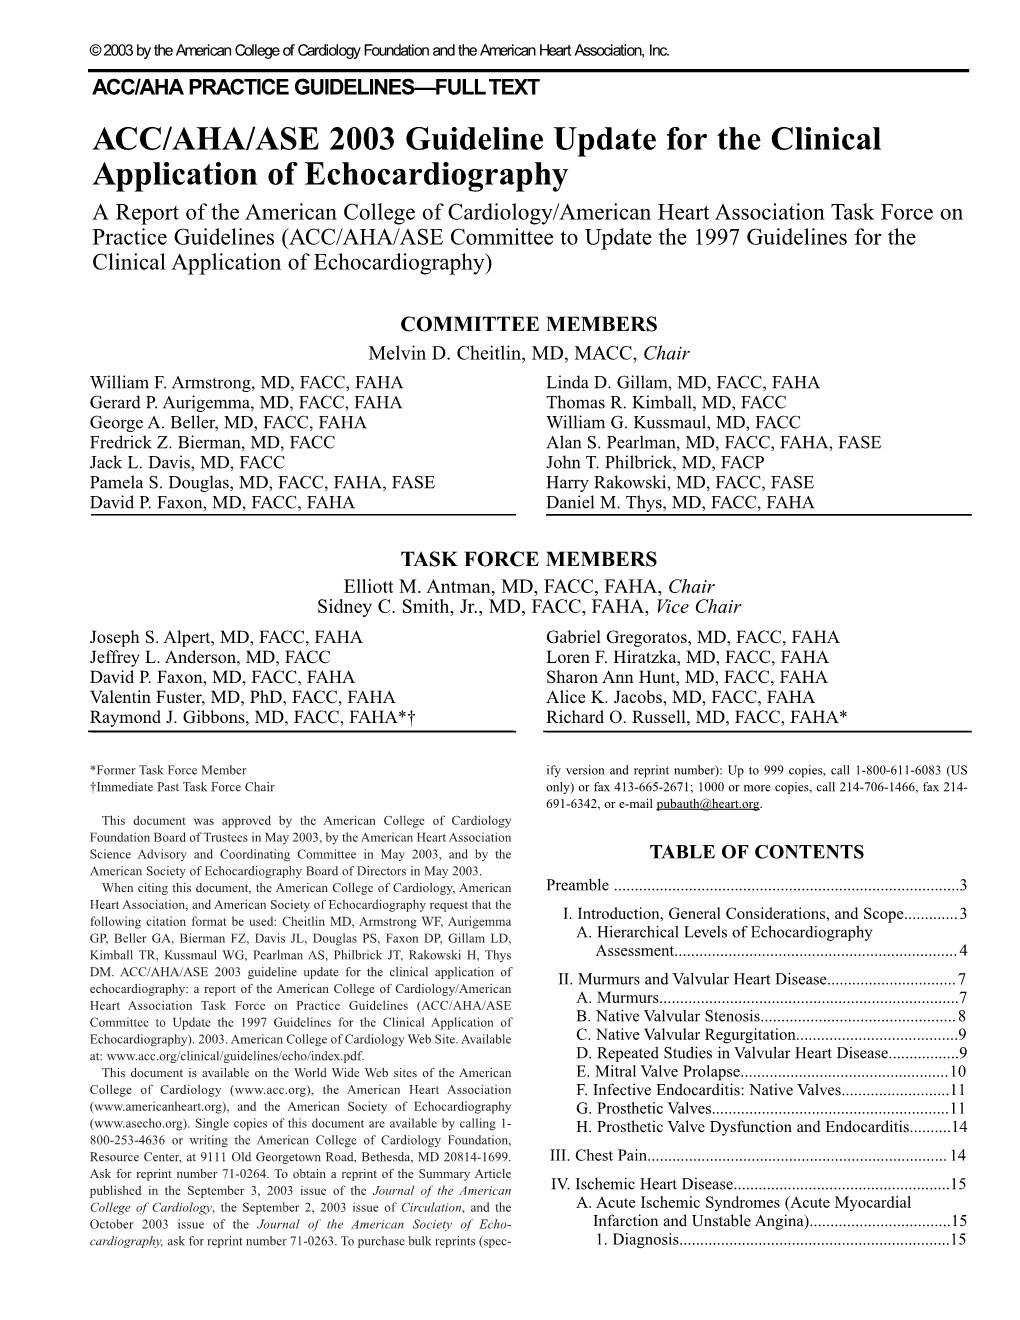 ACC/AHA/ASE 2003 Guideline Update for the Clinical Application of Echocardiography